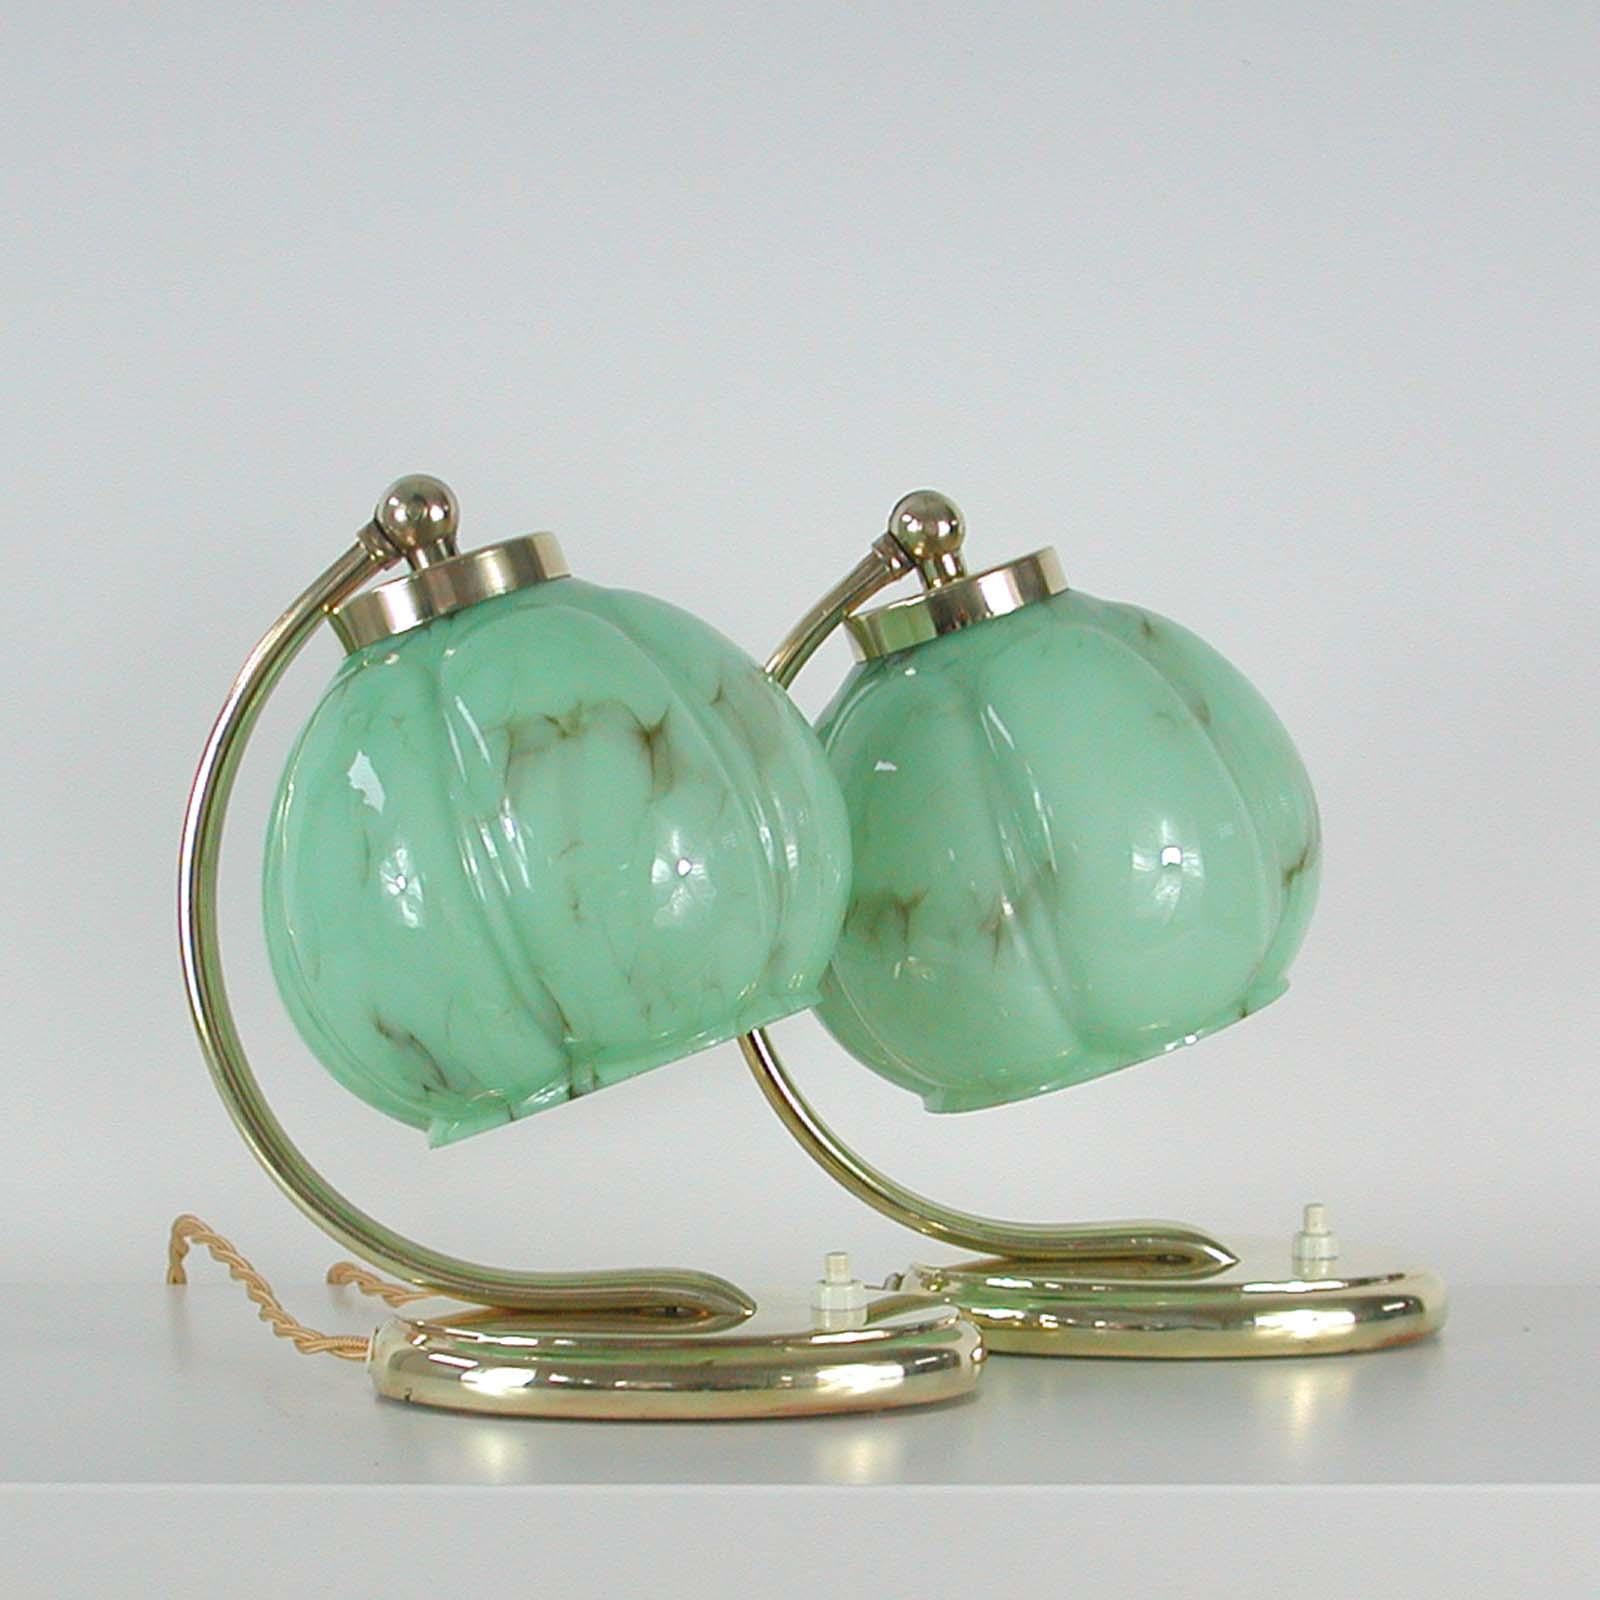 These table or bedside lamps were designed and manufactured in Germany in the 1930s during the Bauhaus period. They are made of brass and have got pale green marbled opaline glass lamp shades.

Both lamps have been rewired with new silk cord for